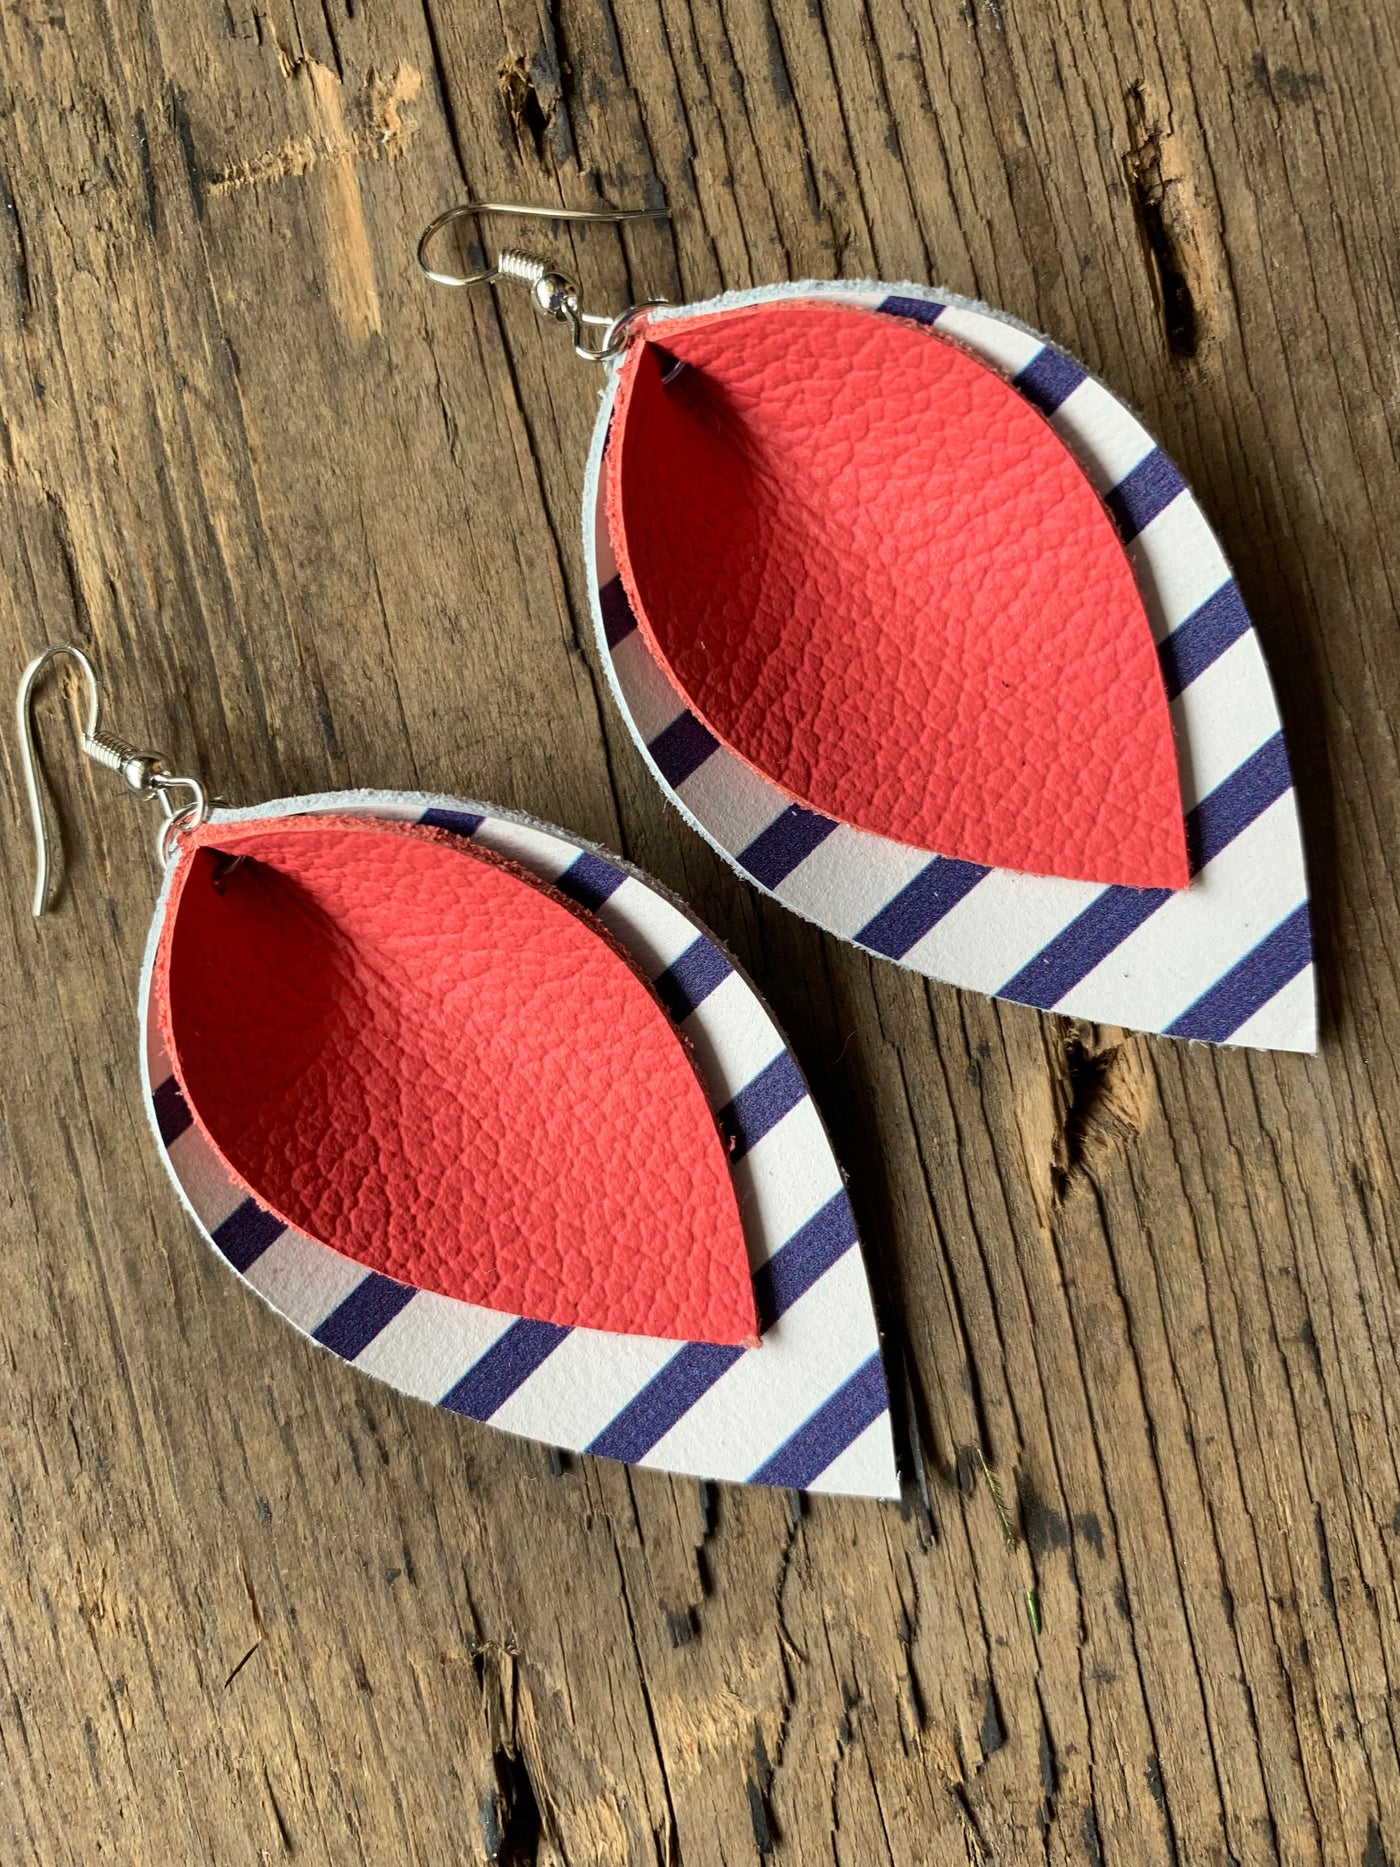 Coral Leather earrings with blue and white stripes - Jill's Jewels | Unique, Handcrafted, Trendy, And Fun Jewelry